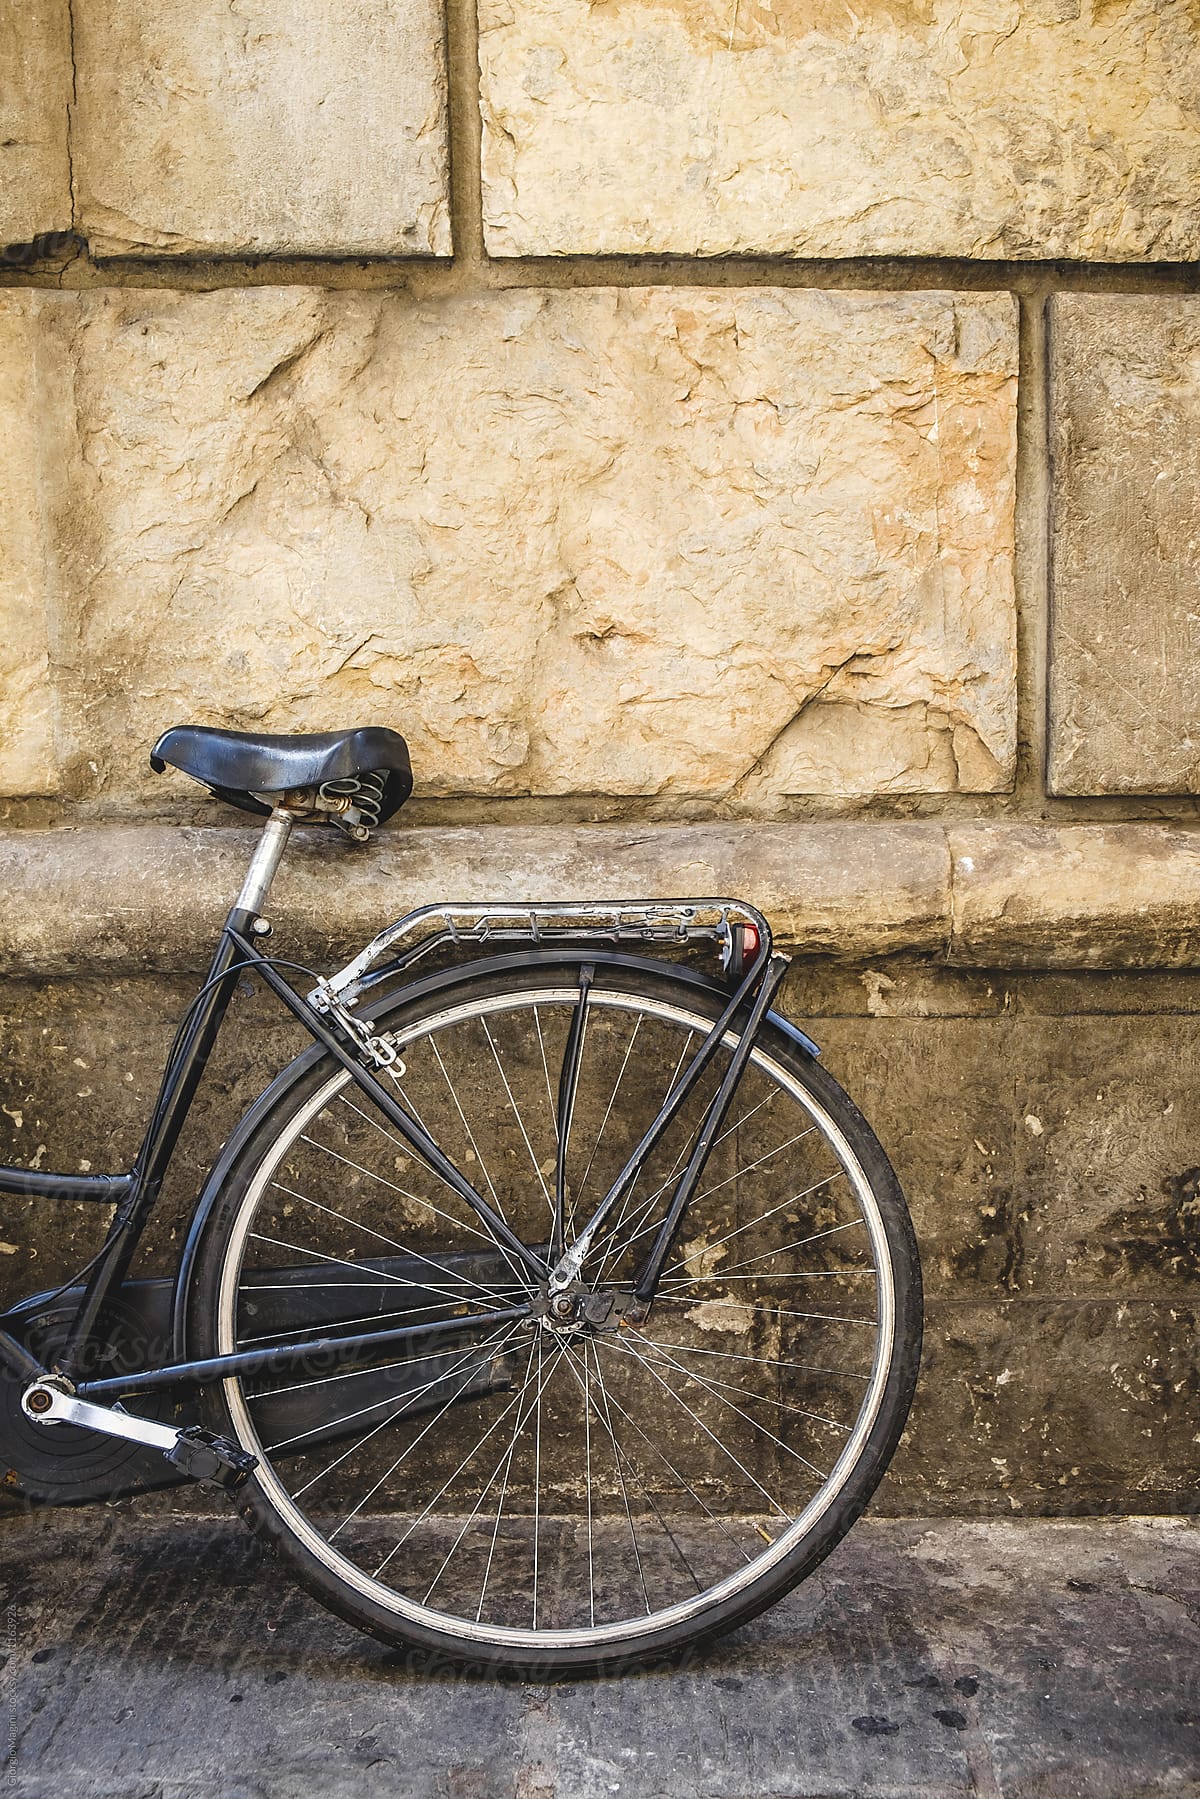 Retro Bicycle Leaning on a Grungy Wall in Italy